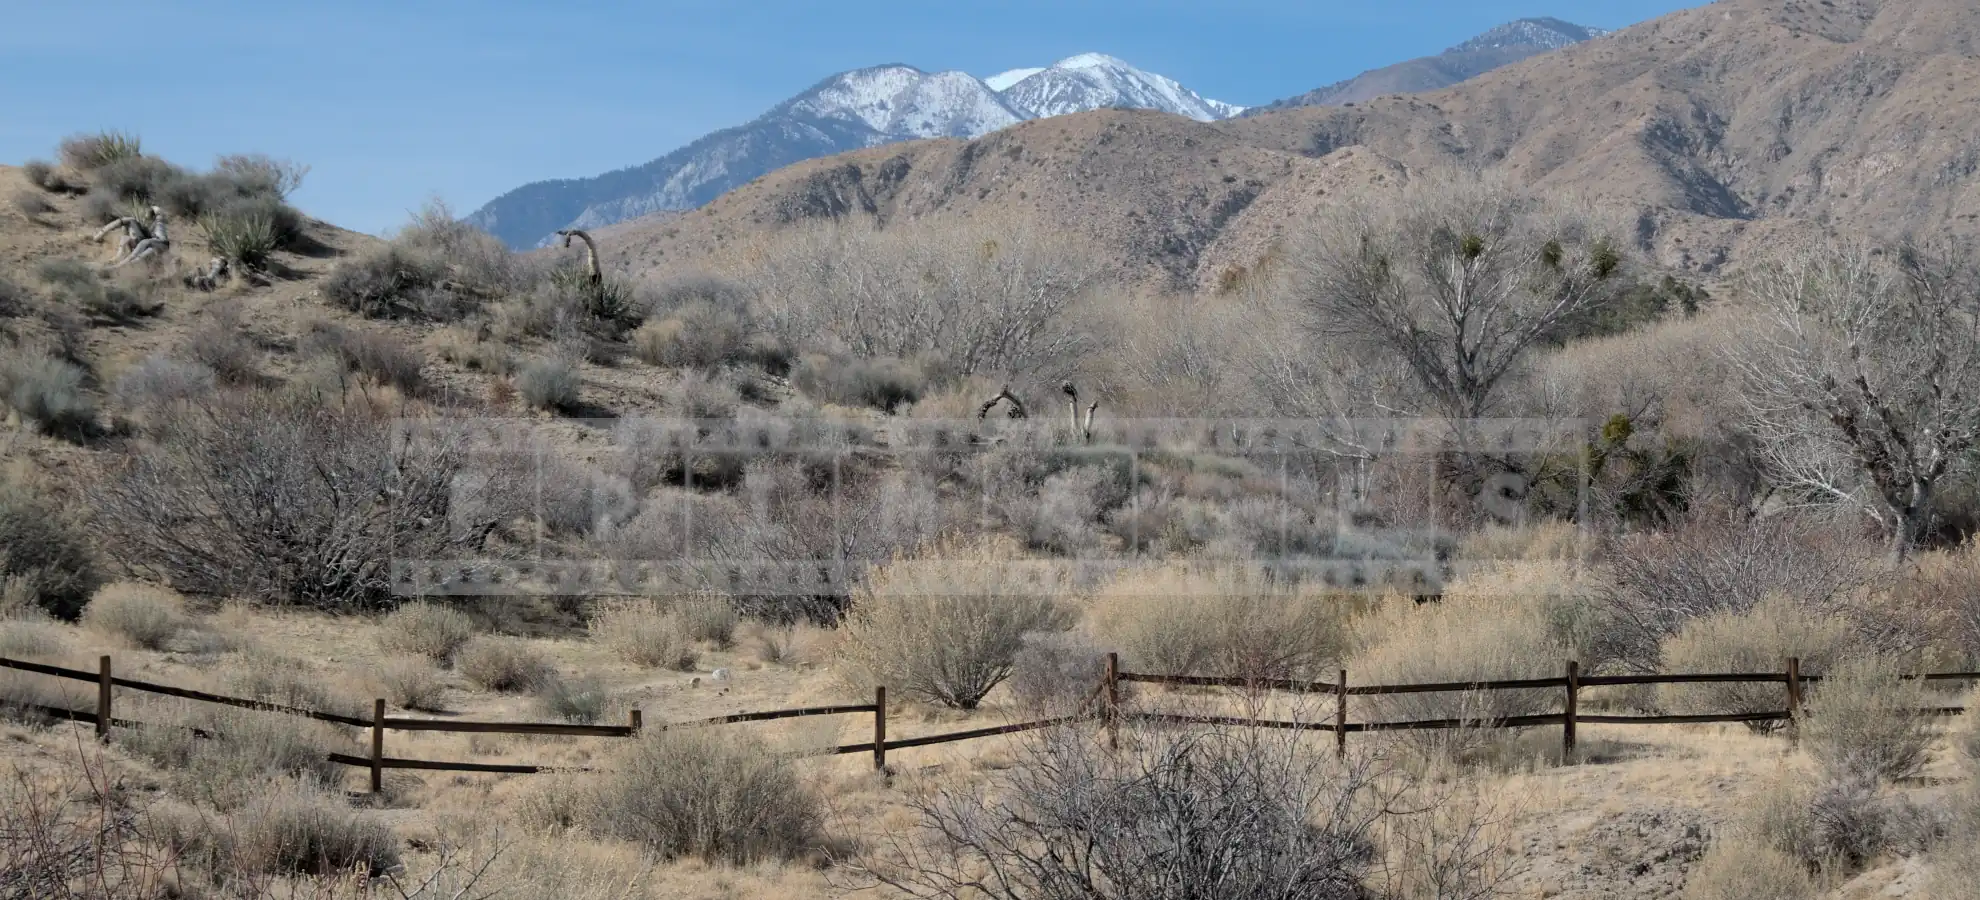 High desert landscape and snow covered mountains at Morongo Preserve